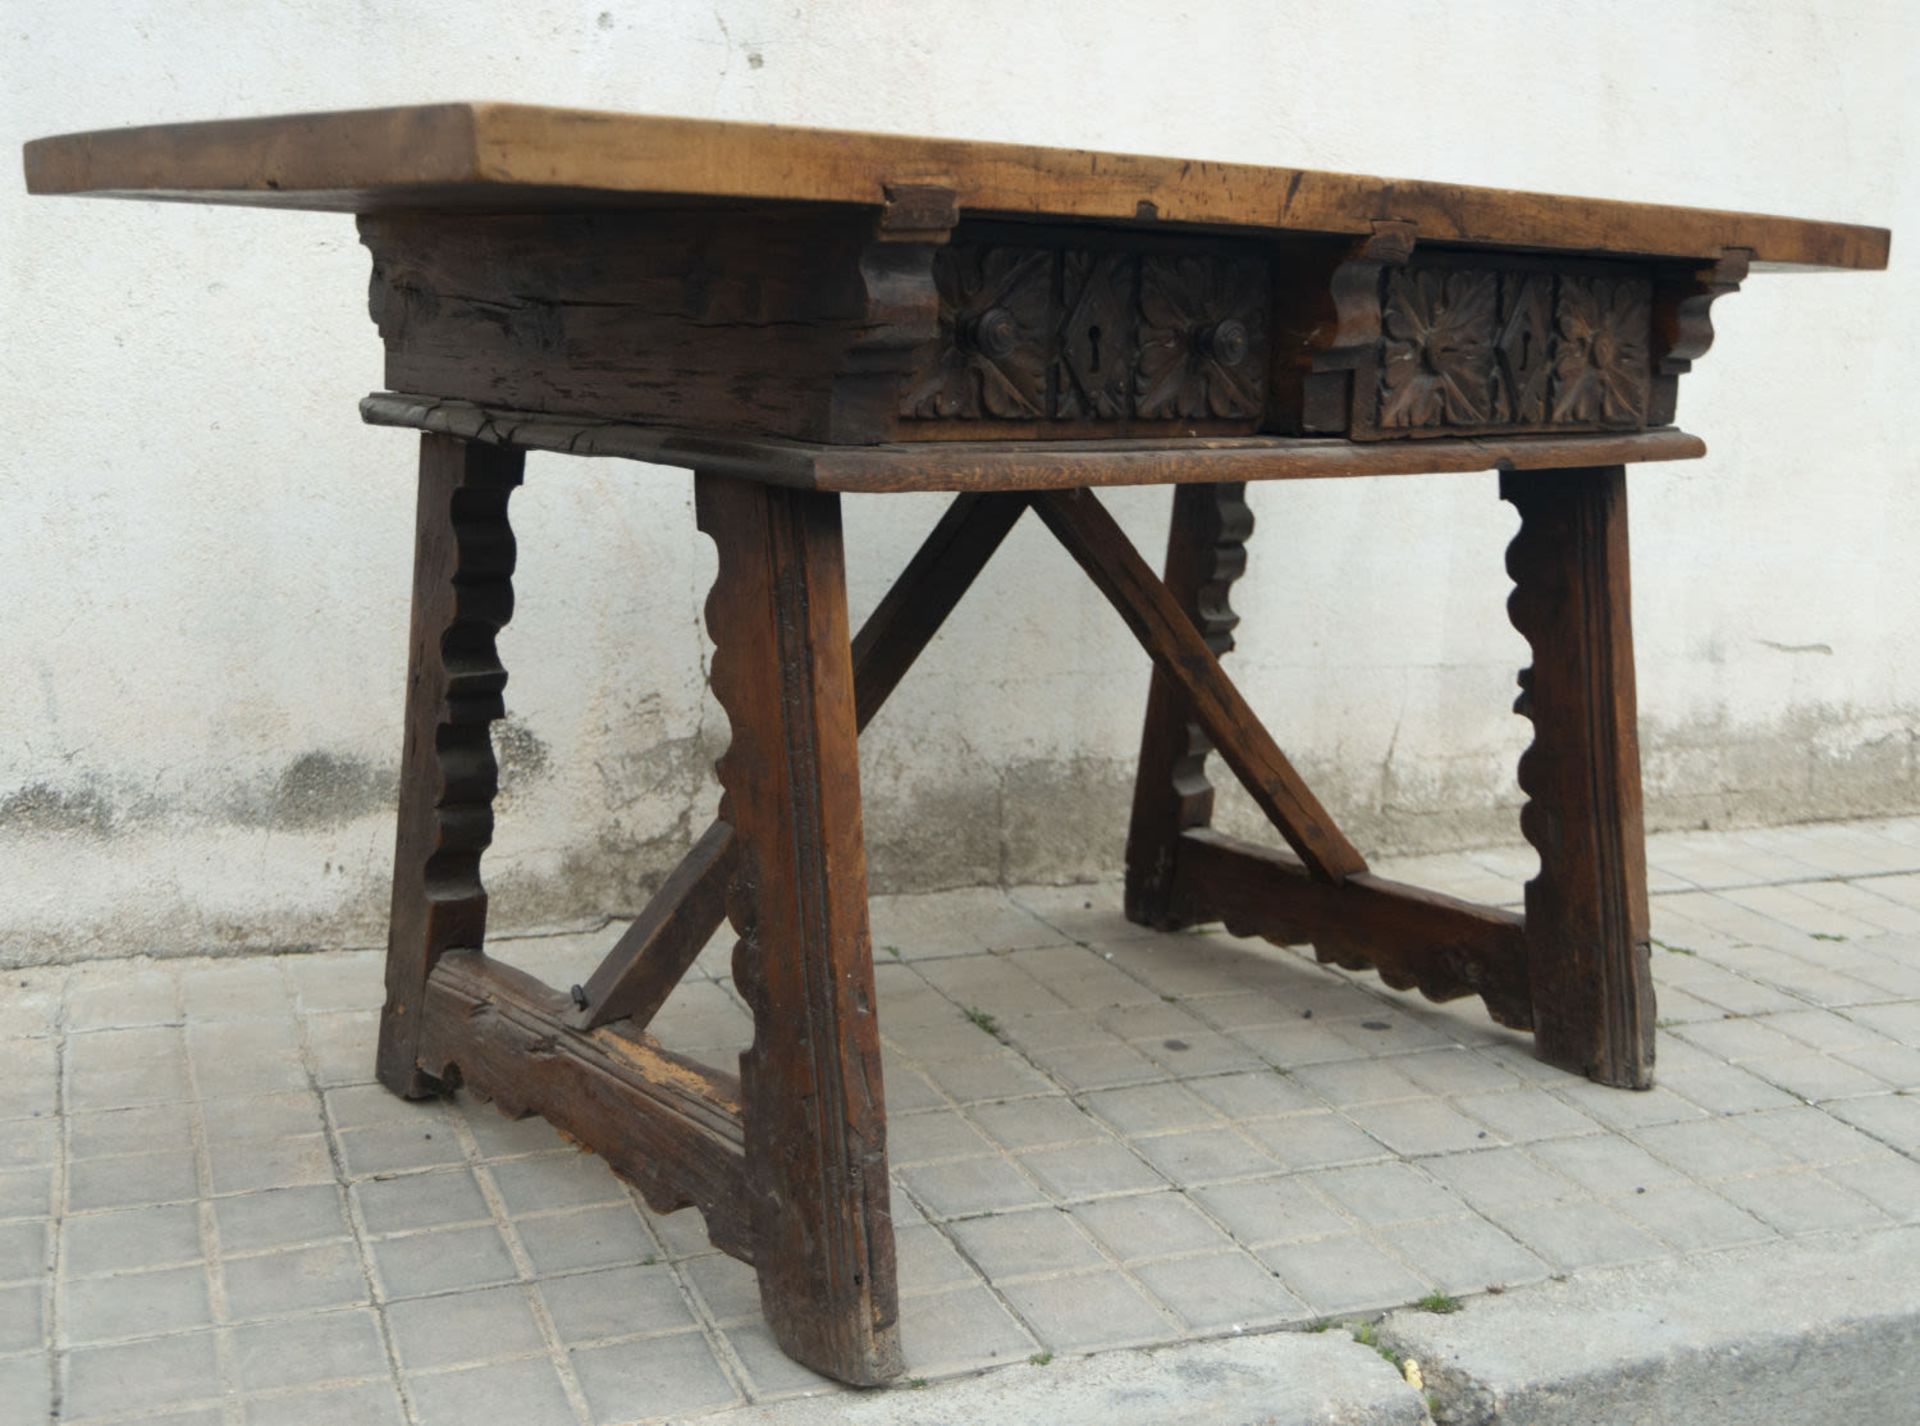 Tyrolean or German kitchen table from Bavaria in oak wood from the 16th century, Swiss or German Ren - Bild 2 aus 4